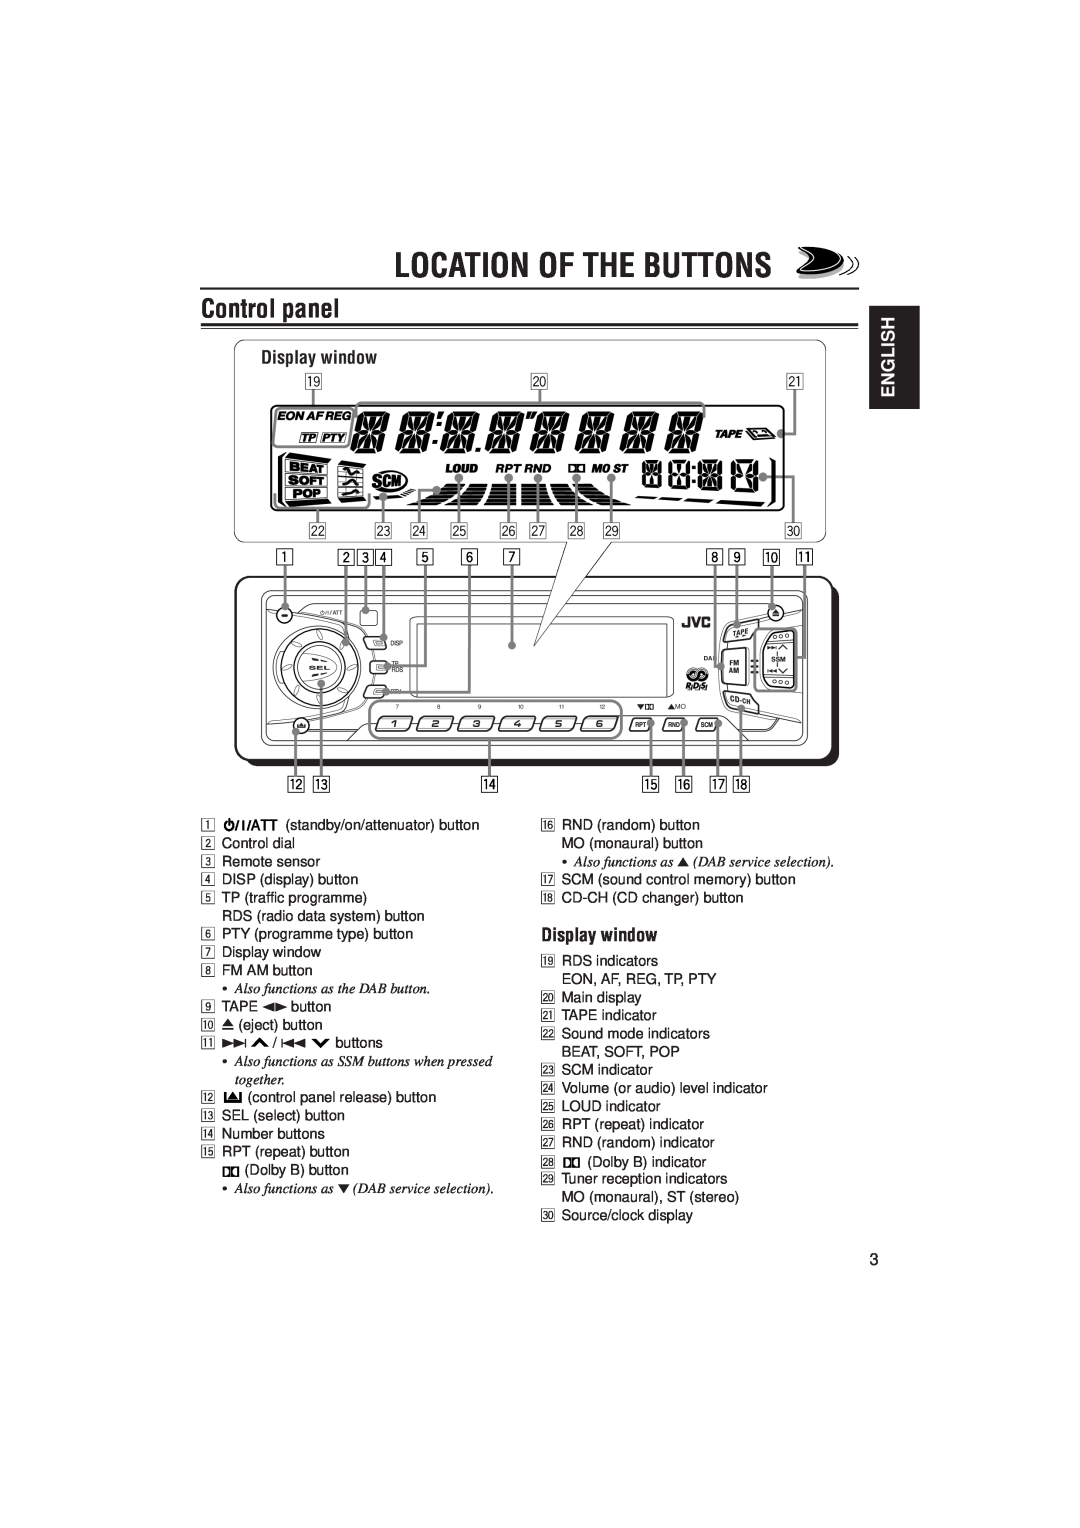 JVC KS-FX822R manual Location Of The Buttons, Control panel, English 